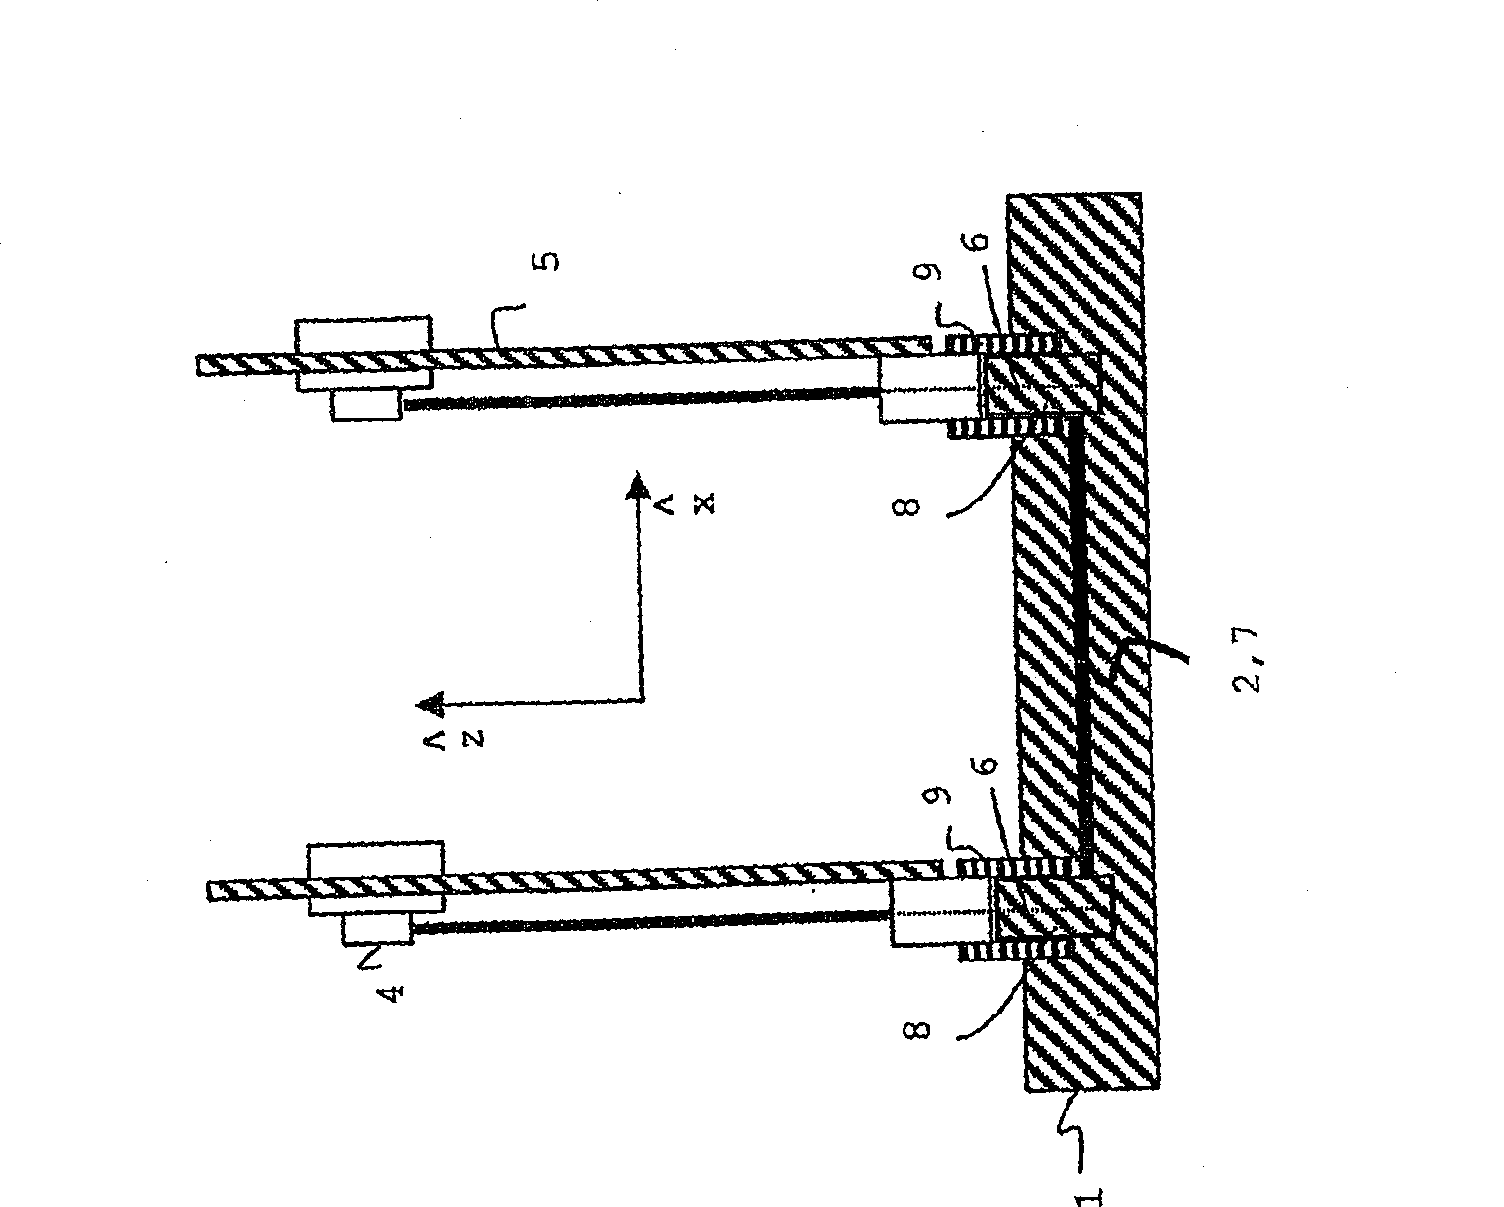 Optical connector assembly, coupling device and method for aligning such a coupling device and a waveguide structure